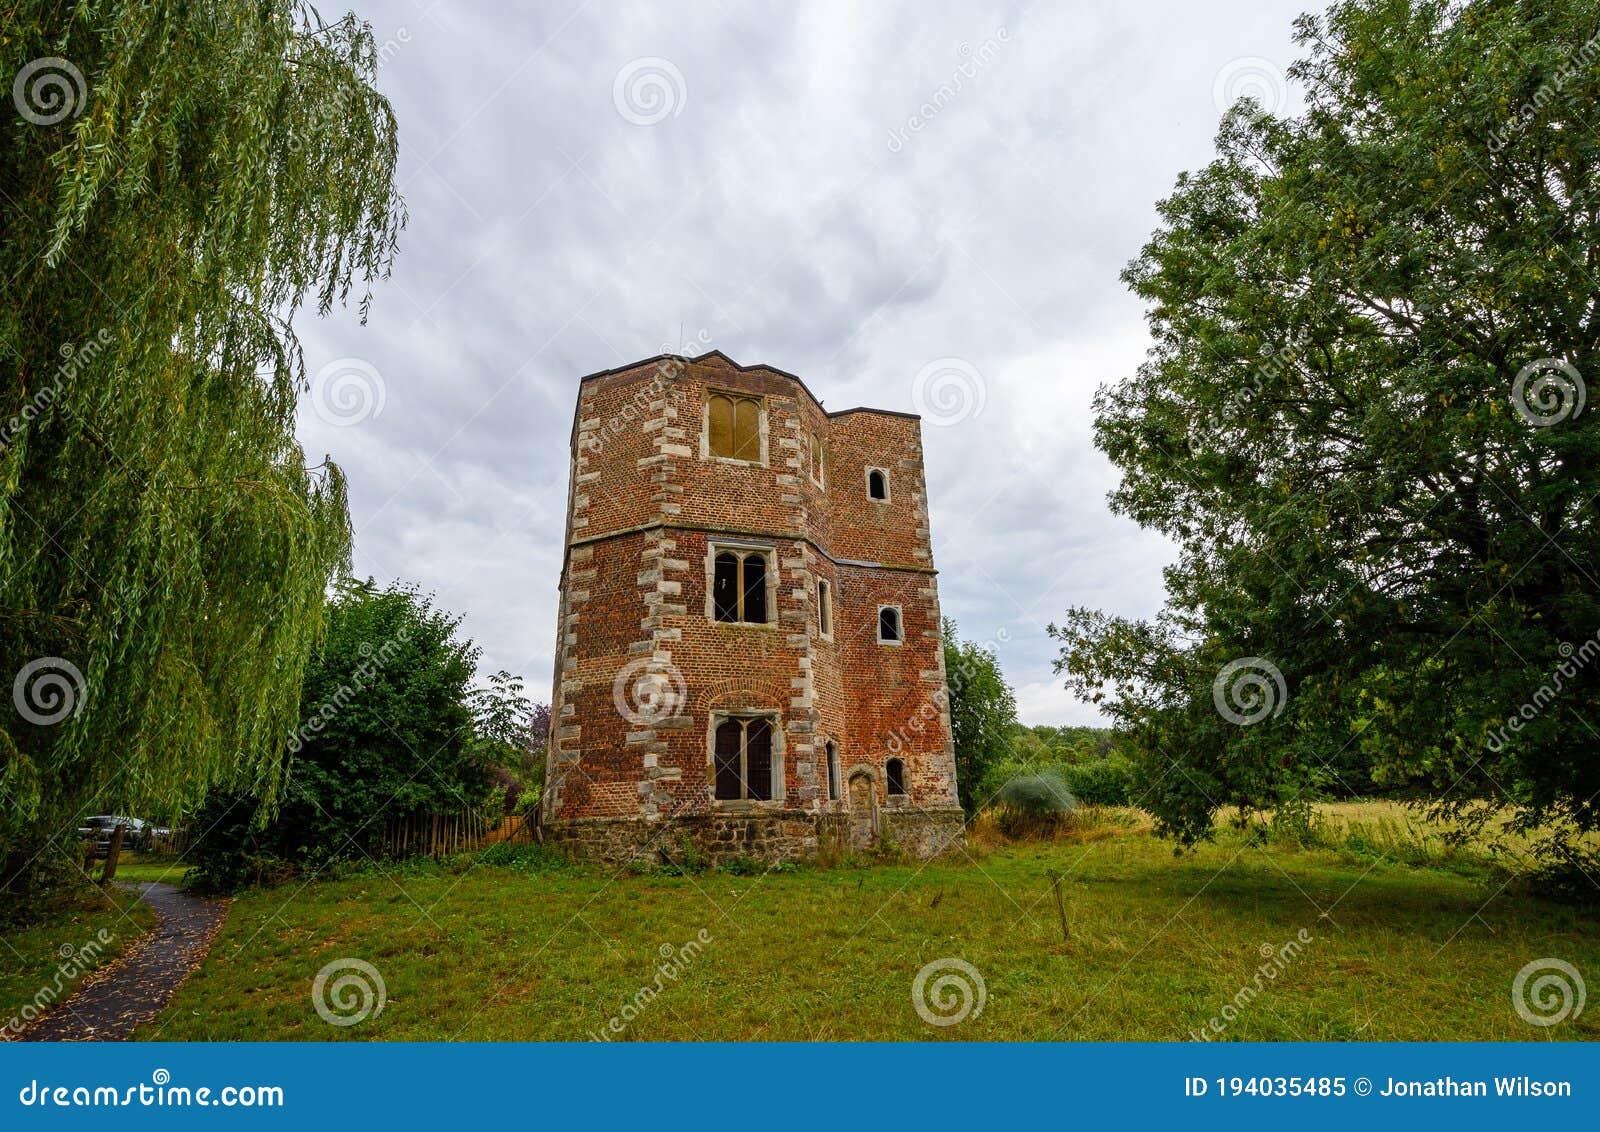 otford palace or the archbishop`s palace in otford, kent, uk